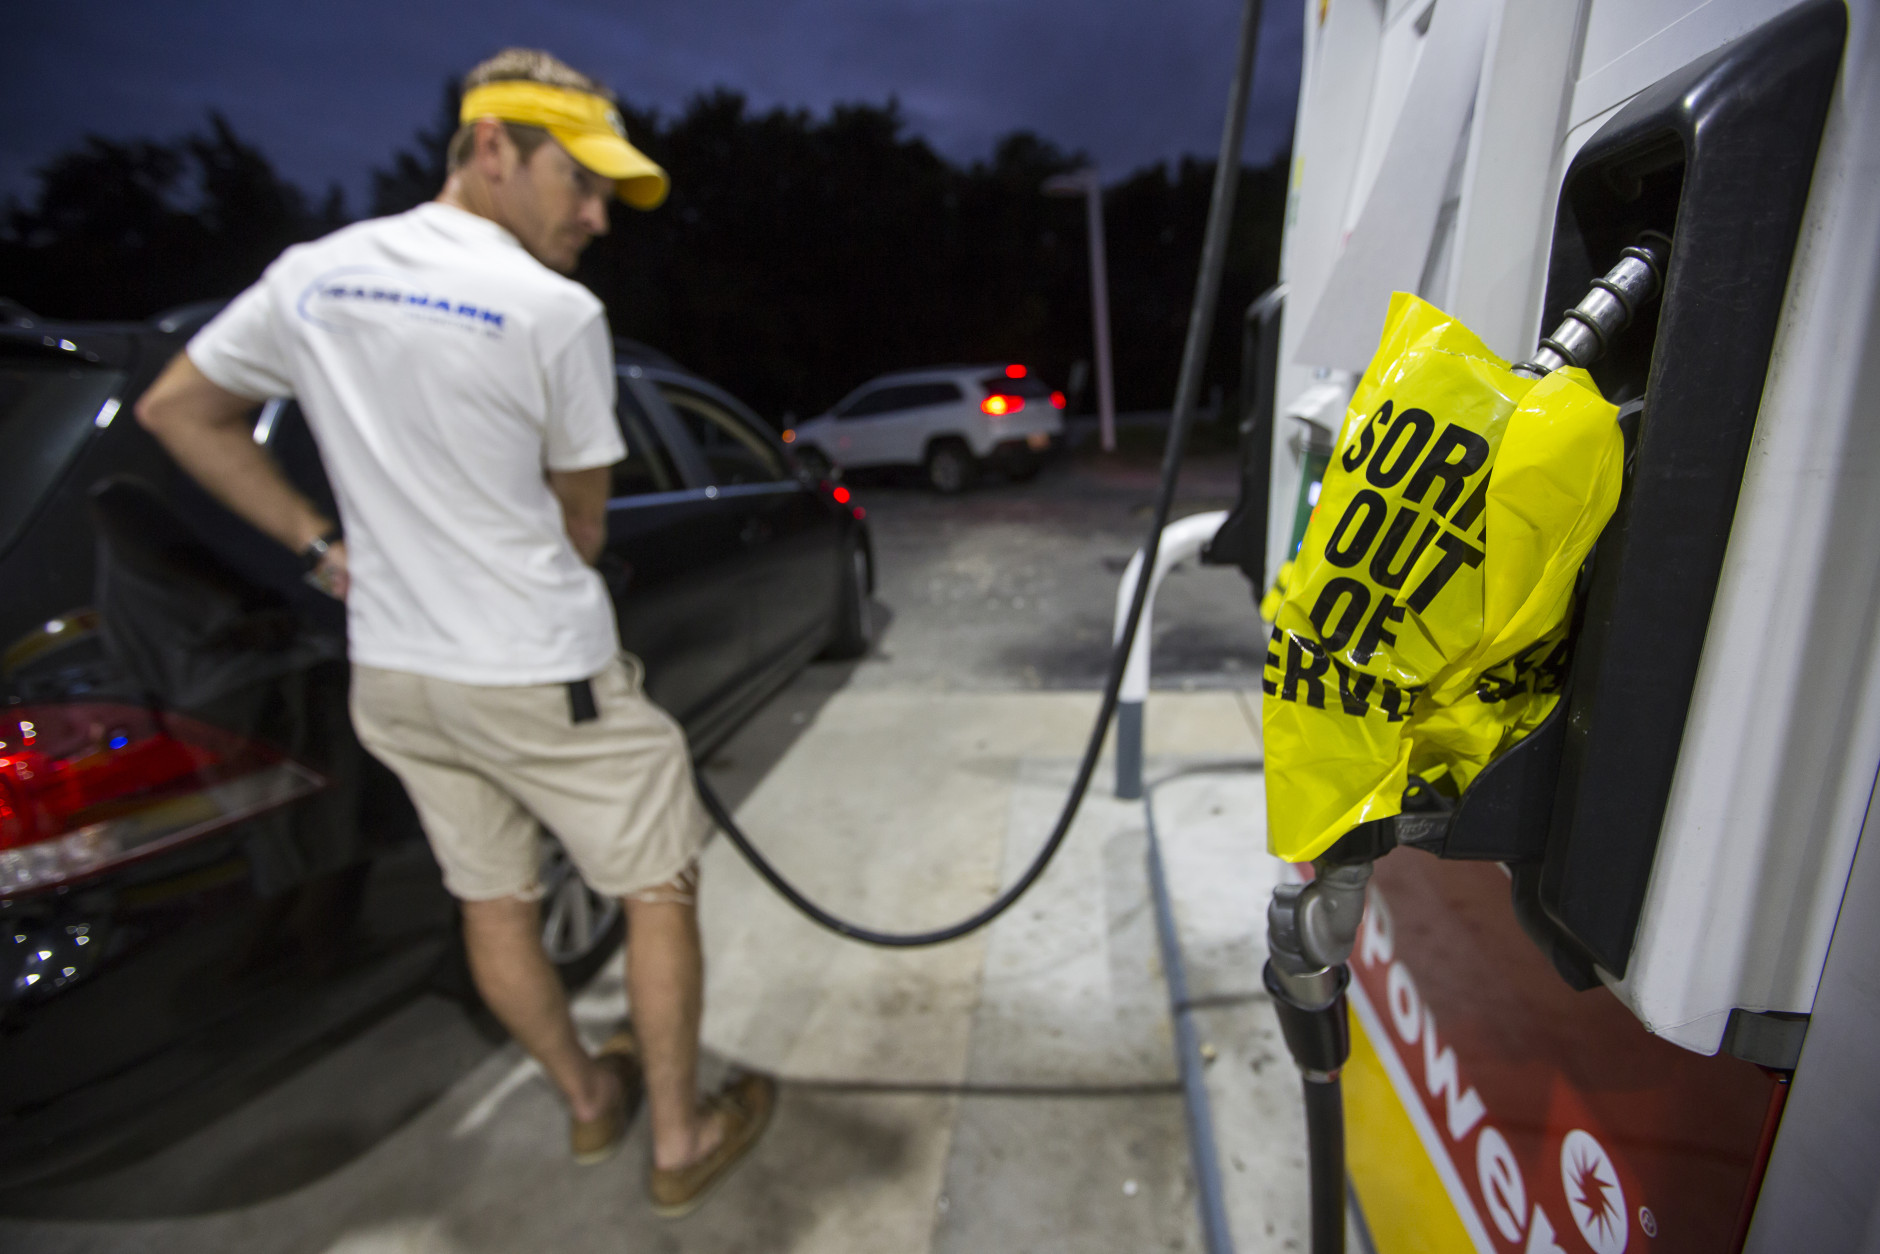 Andrew Castle fills up his car with diesel, the only gas left at a Shell station, in advance of Hurricane Matthew in Mt. Pleasant, S.C., Tuesday, Oct. 4, 2016 Hurricane Matthew is expected to affect the South Carolina coast by the weekend. "Couldn't get gas at any other place," Castle said. Gov. Nikki Haley announced Tuesday that, unless the track of the storm changes, the state will issue an evacuation order Wednesday ahead of Hurricane Matthew so that 1 million people can safely and comfortably leave the coast.  (AP Photo/Mic Smith)